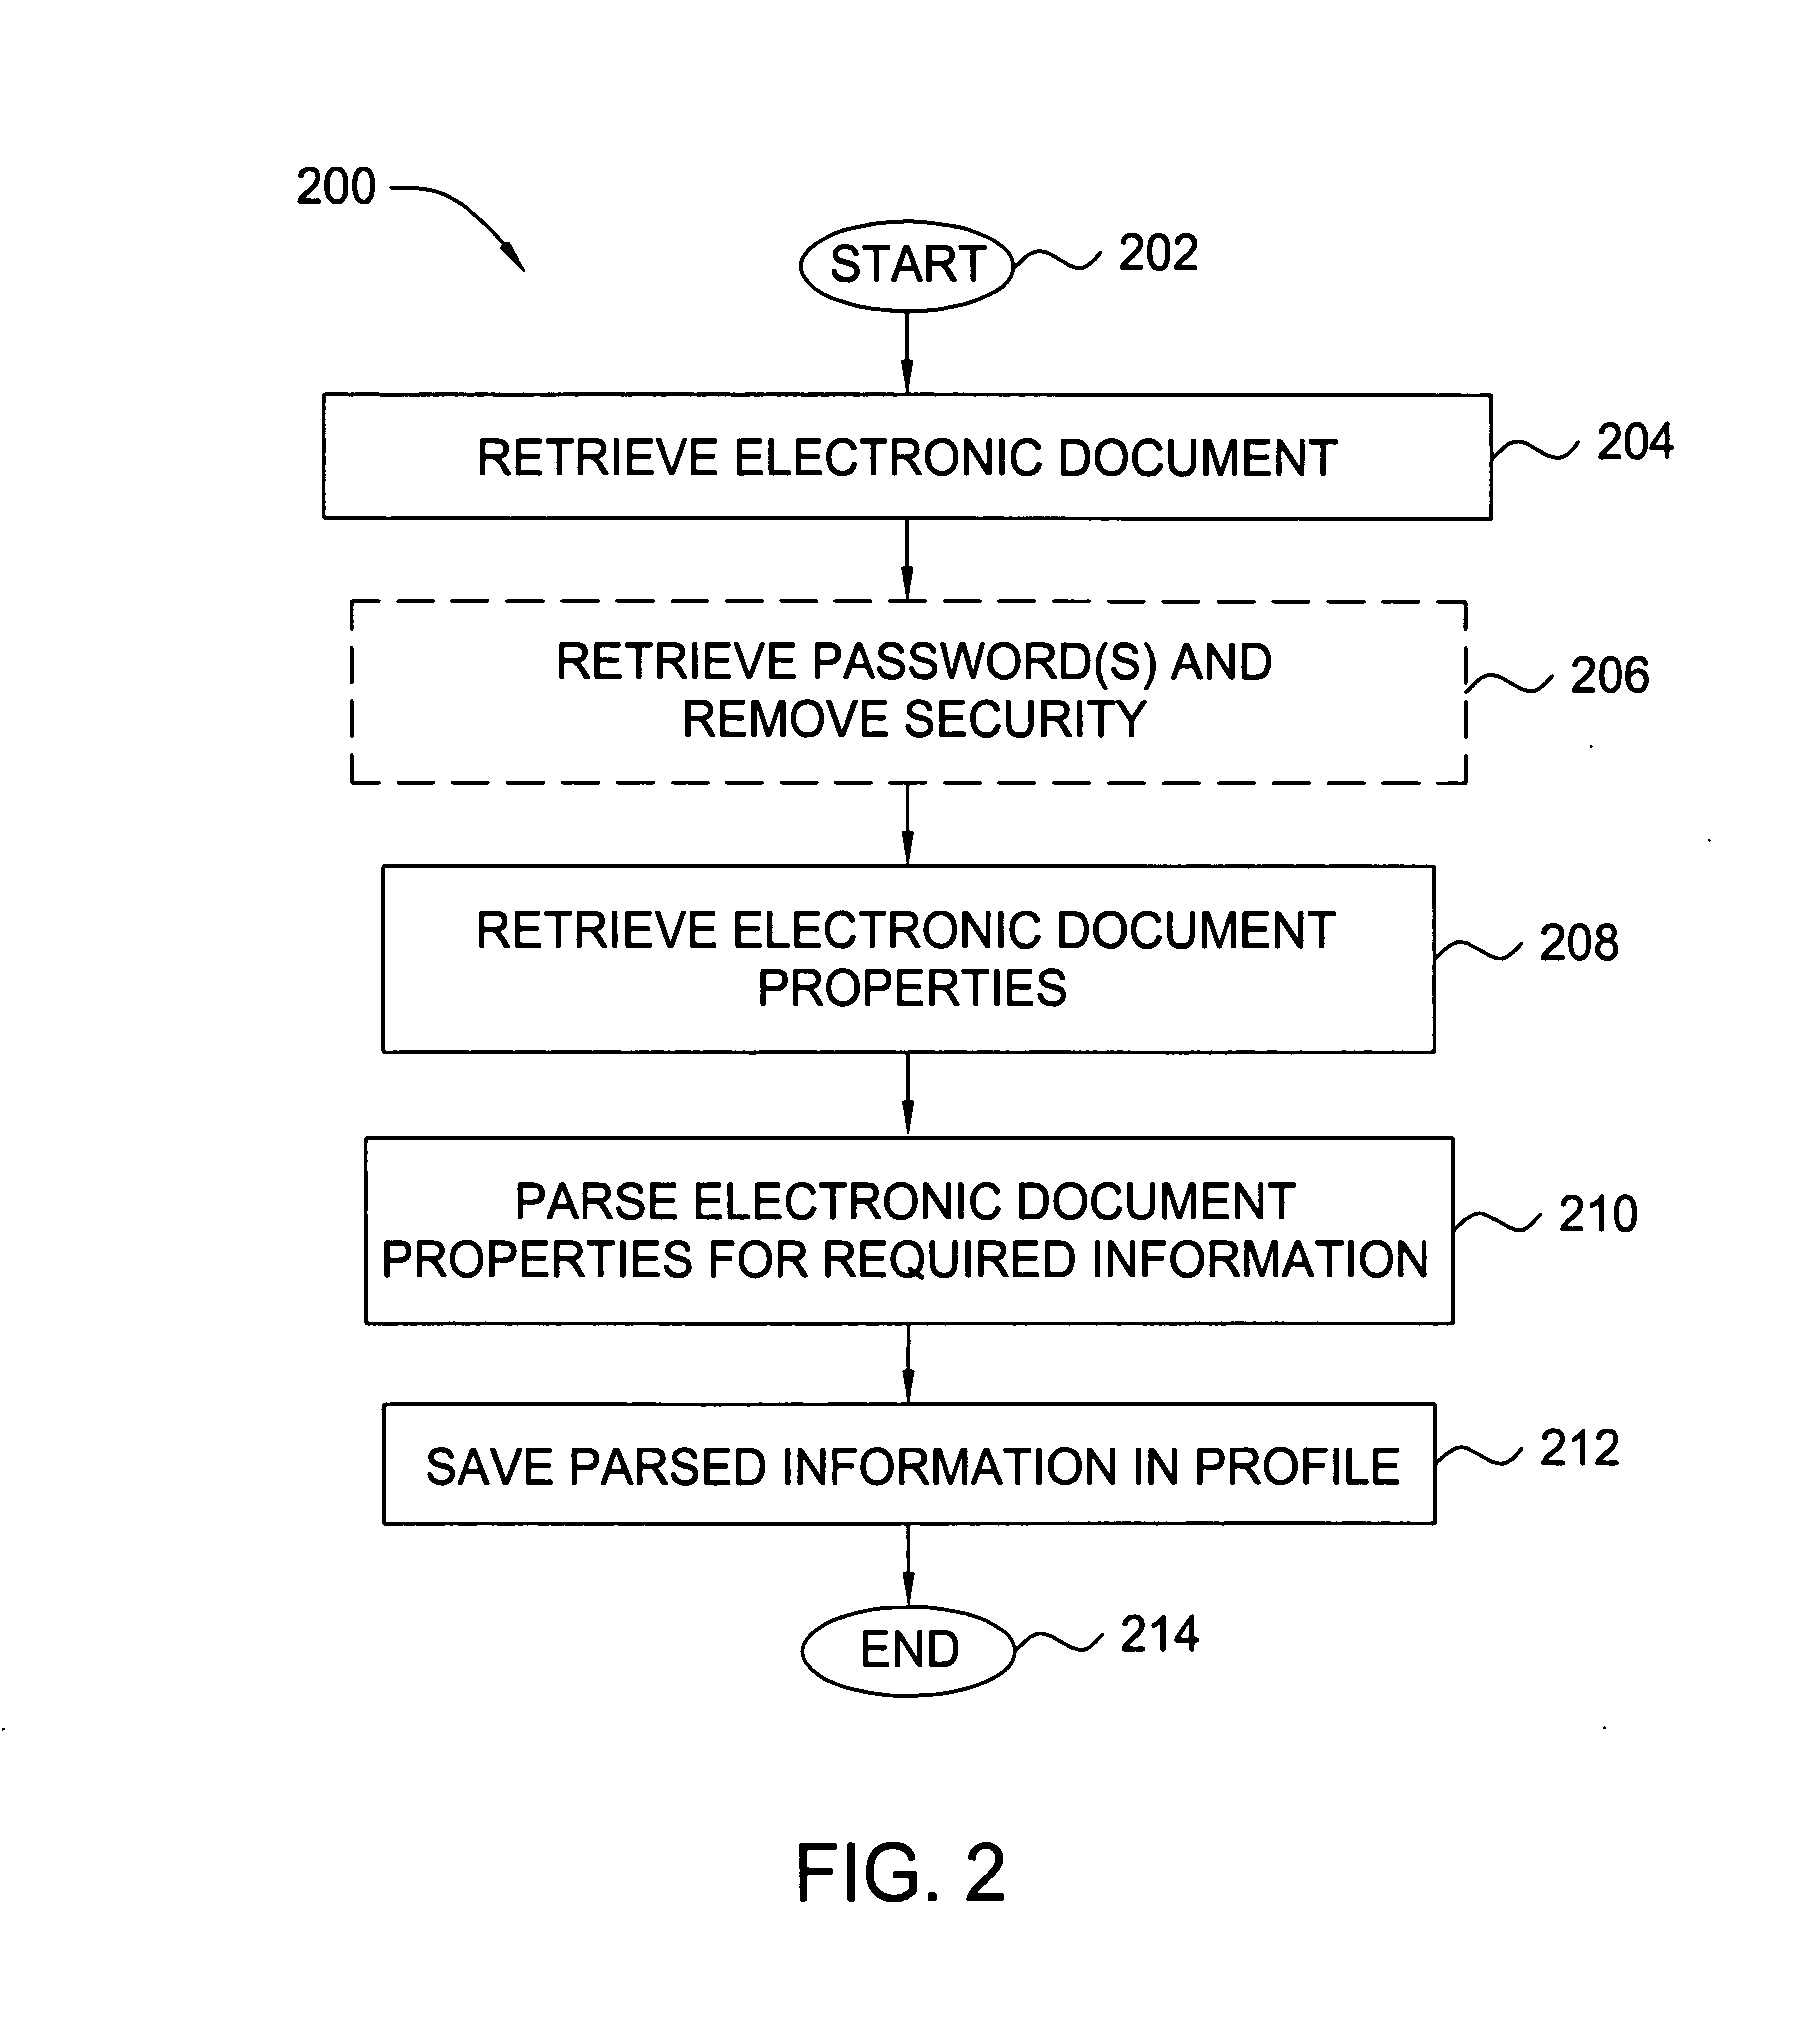 Method and apparatus for adding signature information to electronic documents